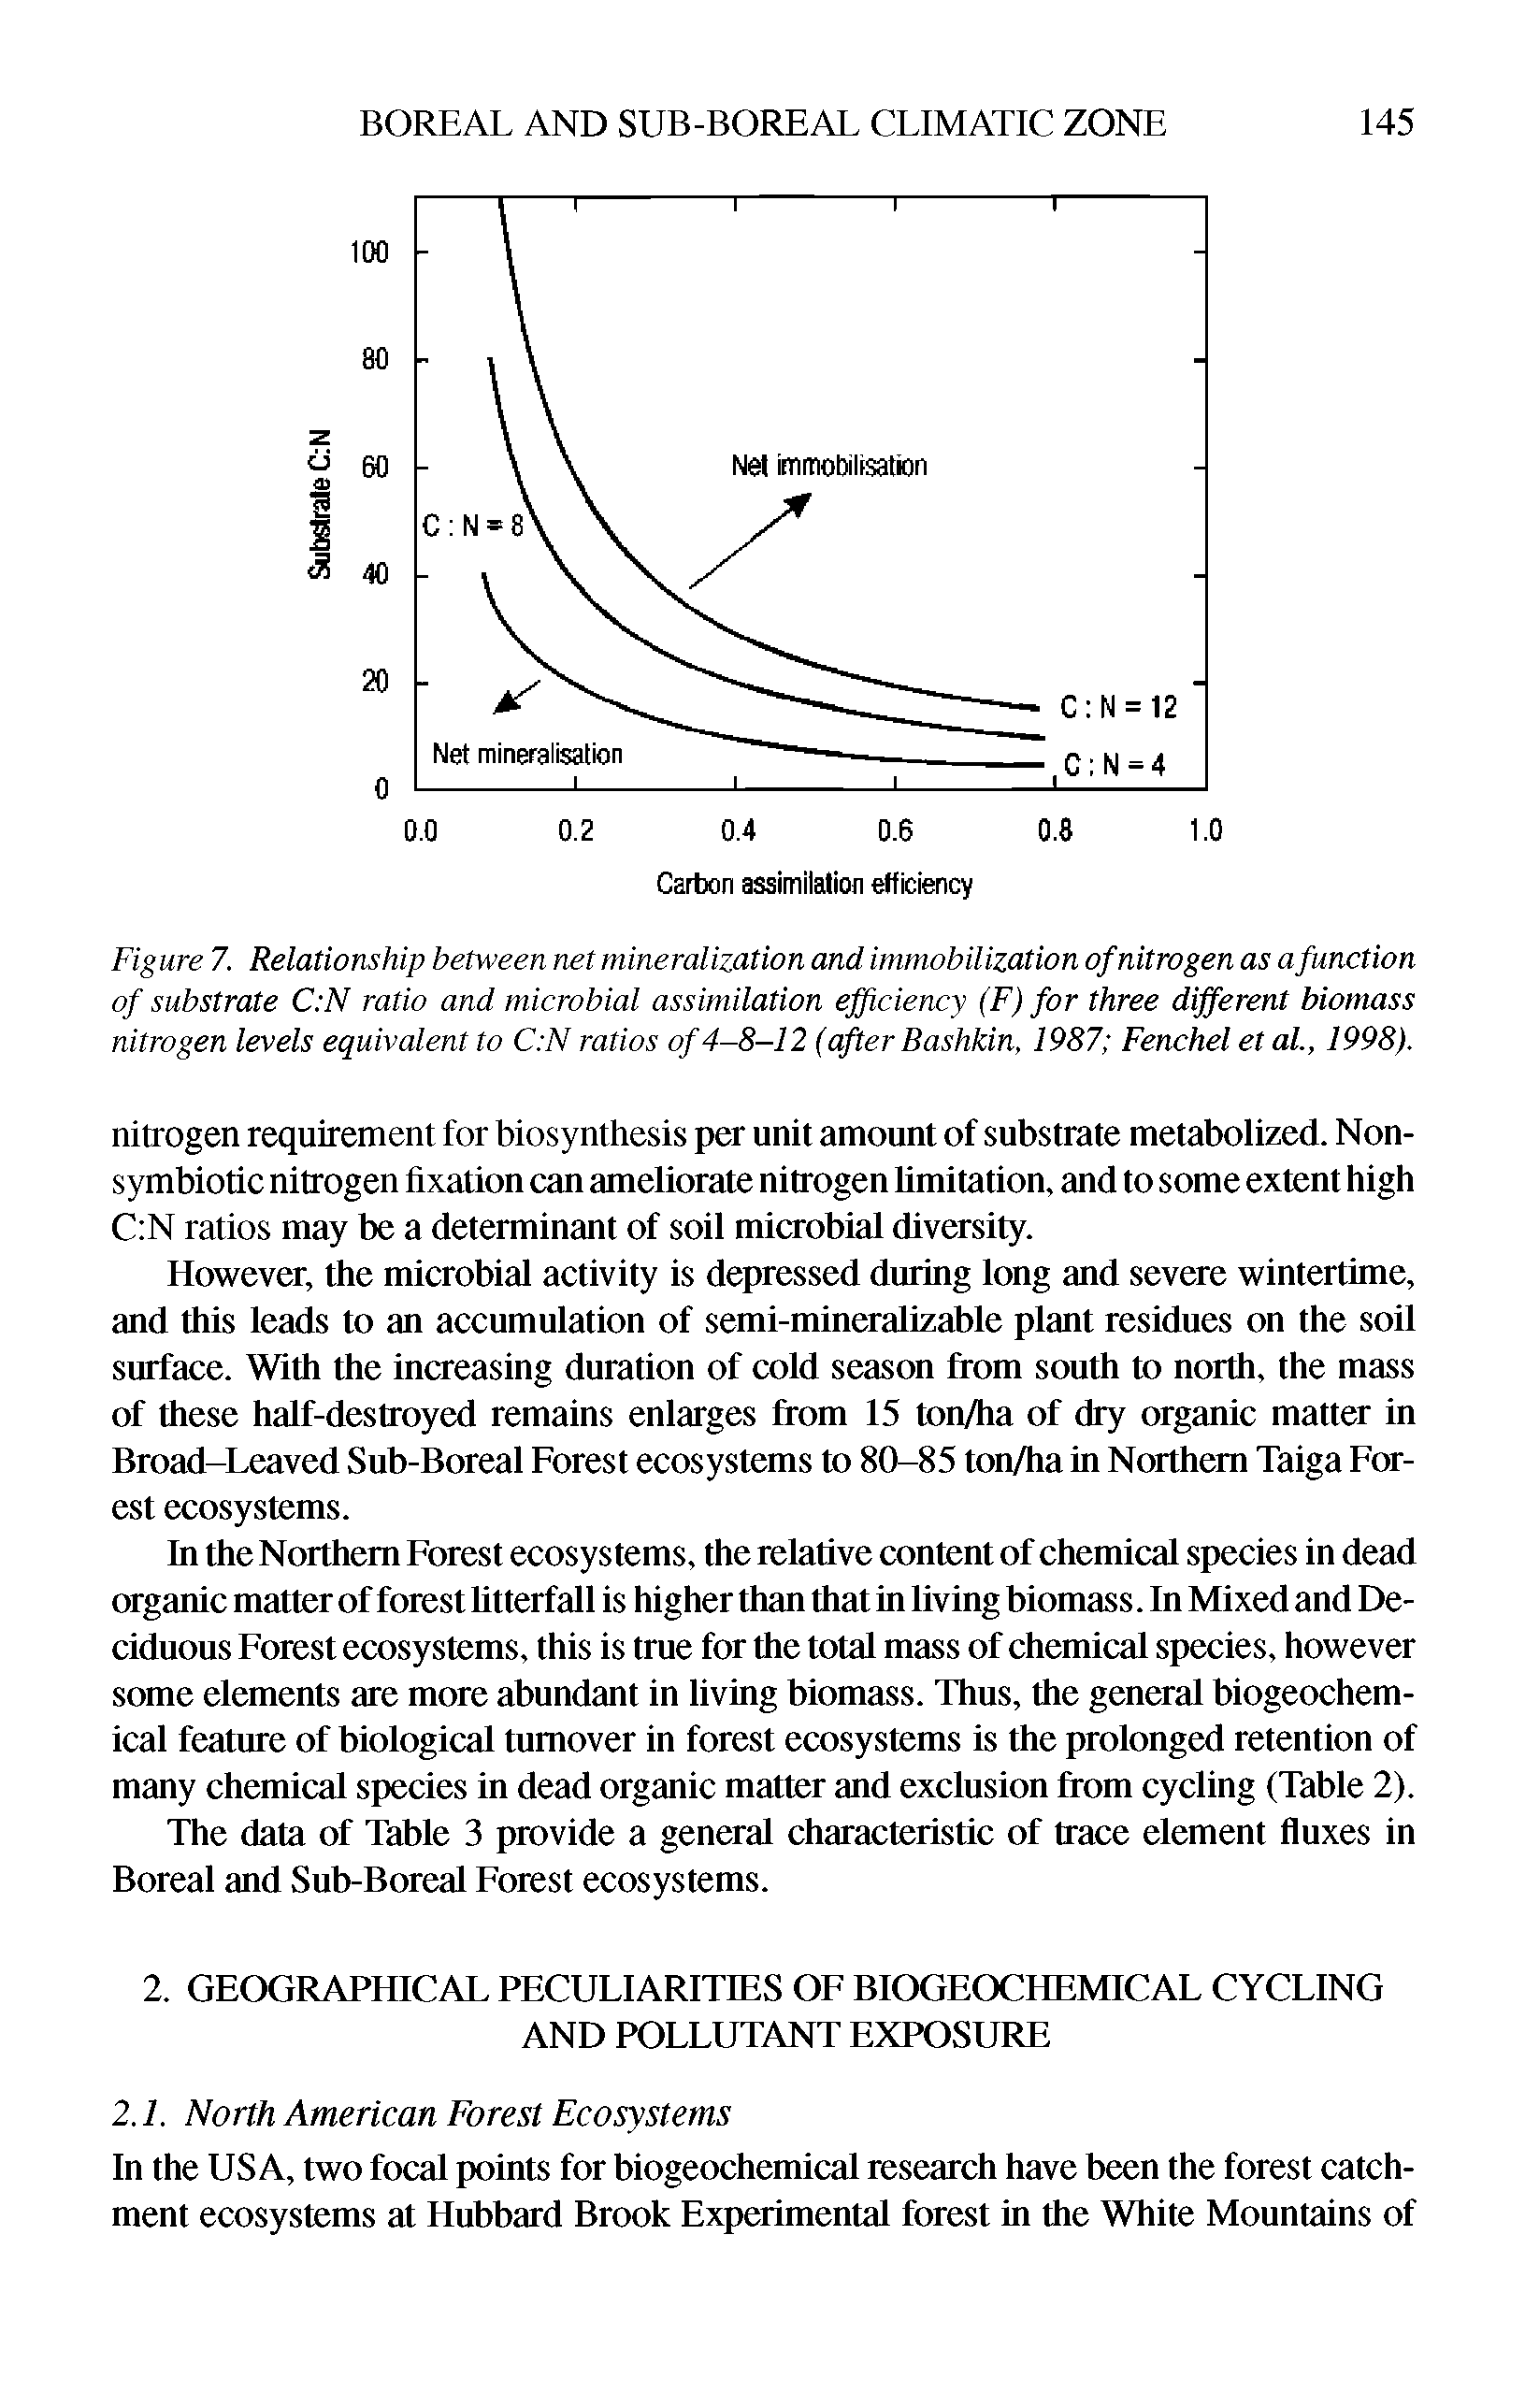 Figure 7. Relationship between net mineralization and immobilization of nitrogen as a function of substrate C N ratio and microbial assimilation efficiency (F) for three different biomass nitrogen levels equivalent to C N ratios of 4-8-12 (after Bashkin, 1987 Fenchel et al., 1998).